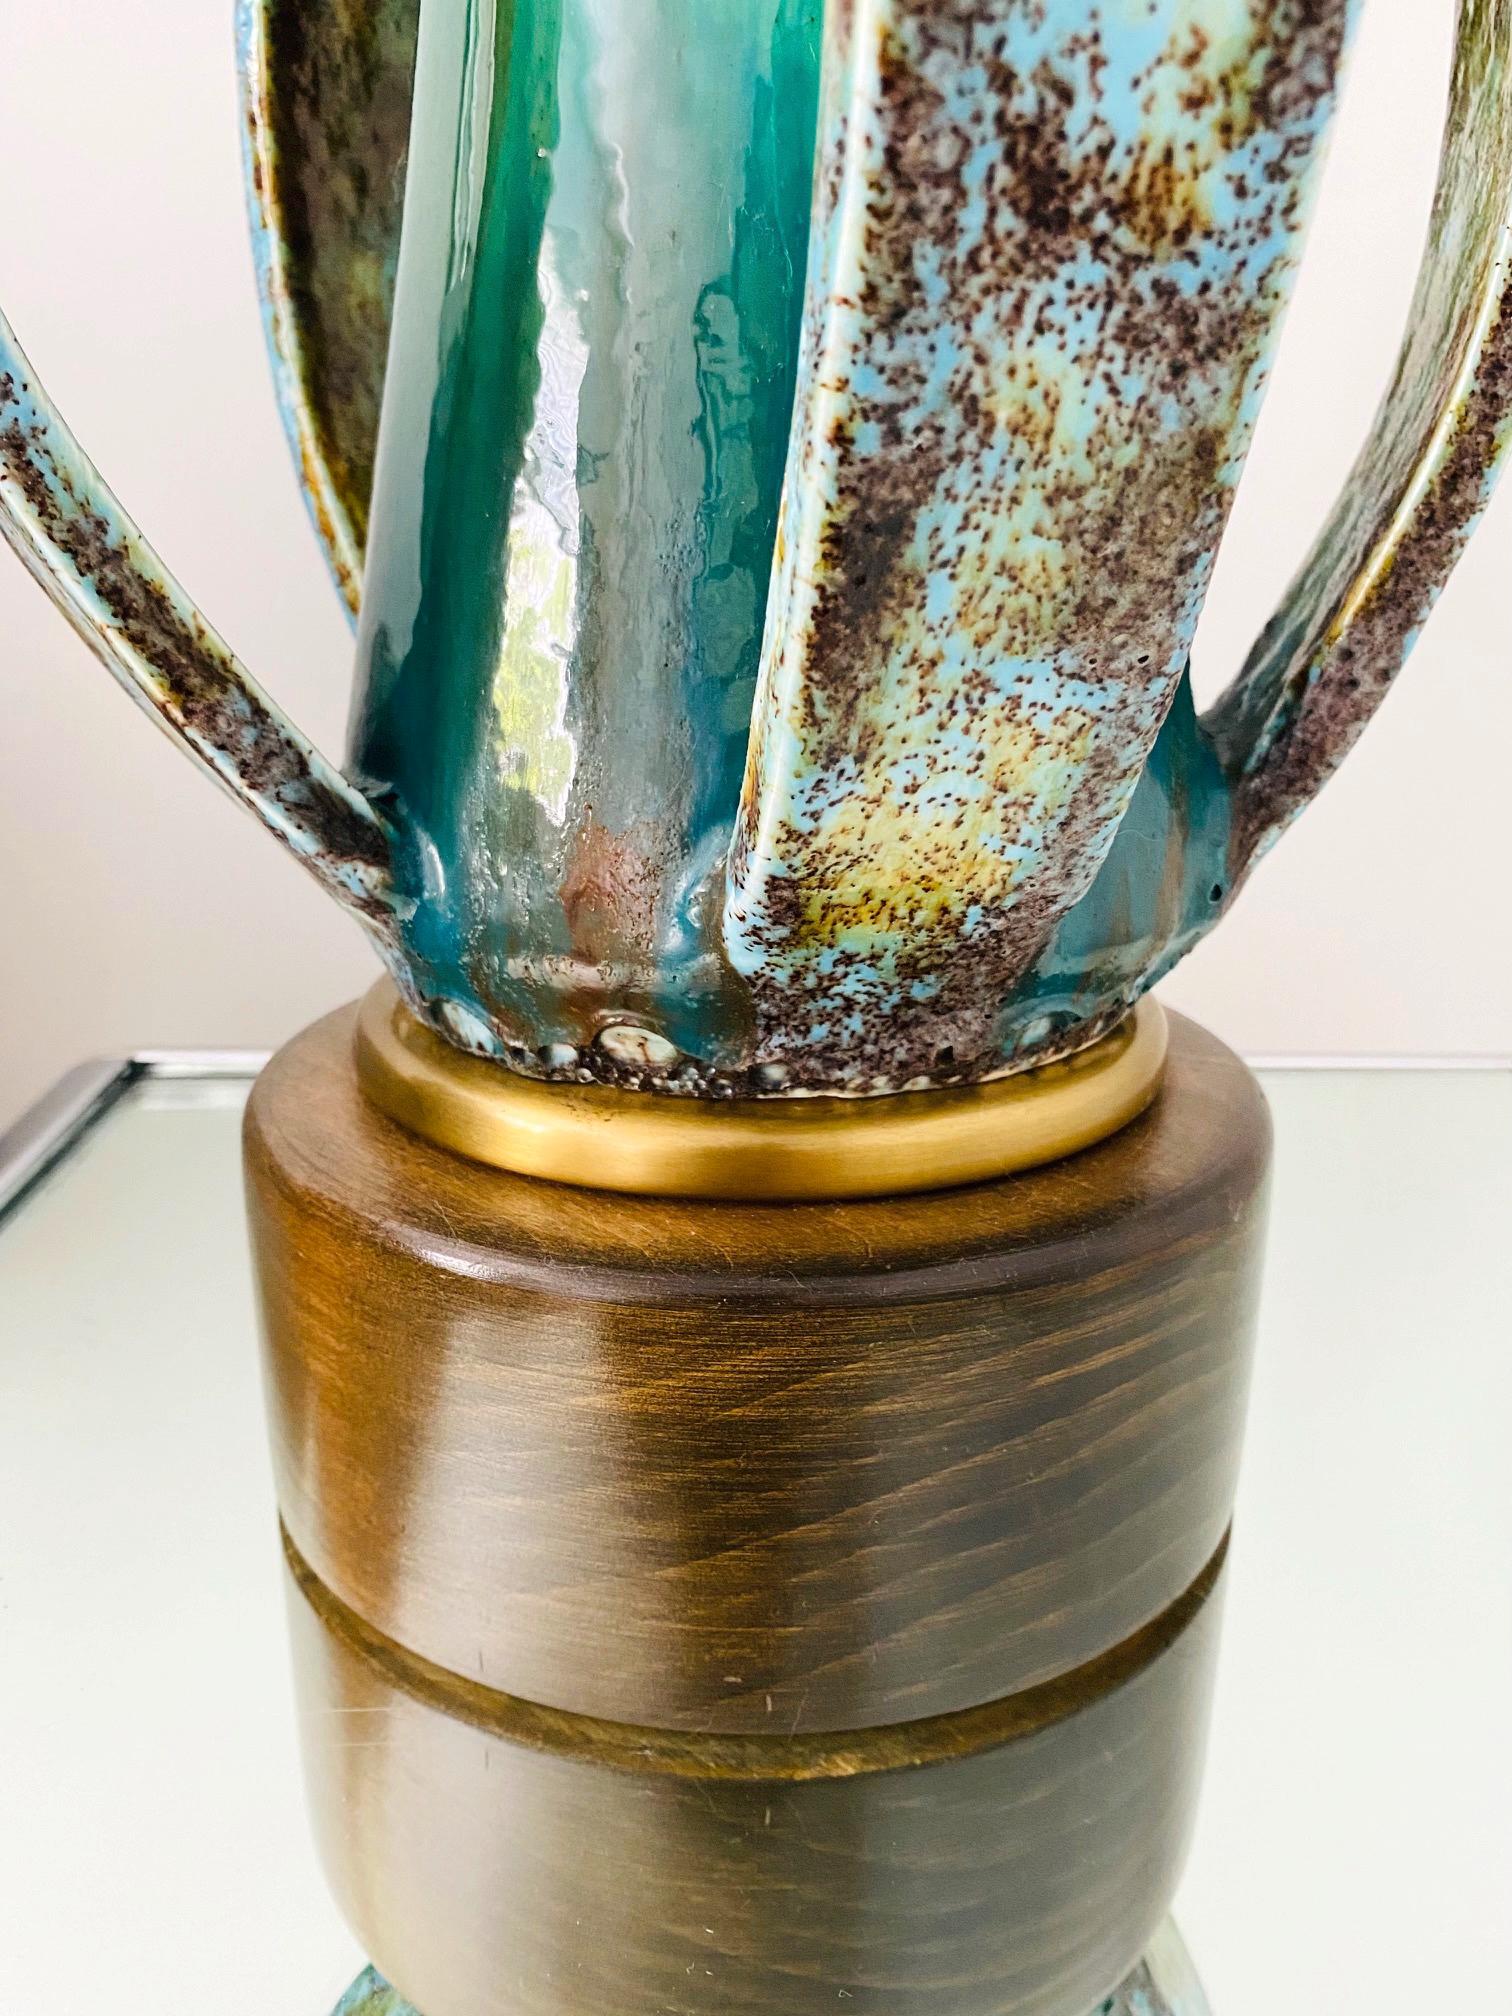 Mid-Century Modern Sculptural Pottery Lamp in Turquoise & Blue, Denmark C. 1960s For Sale 2